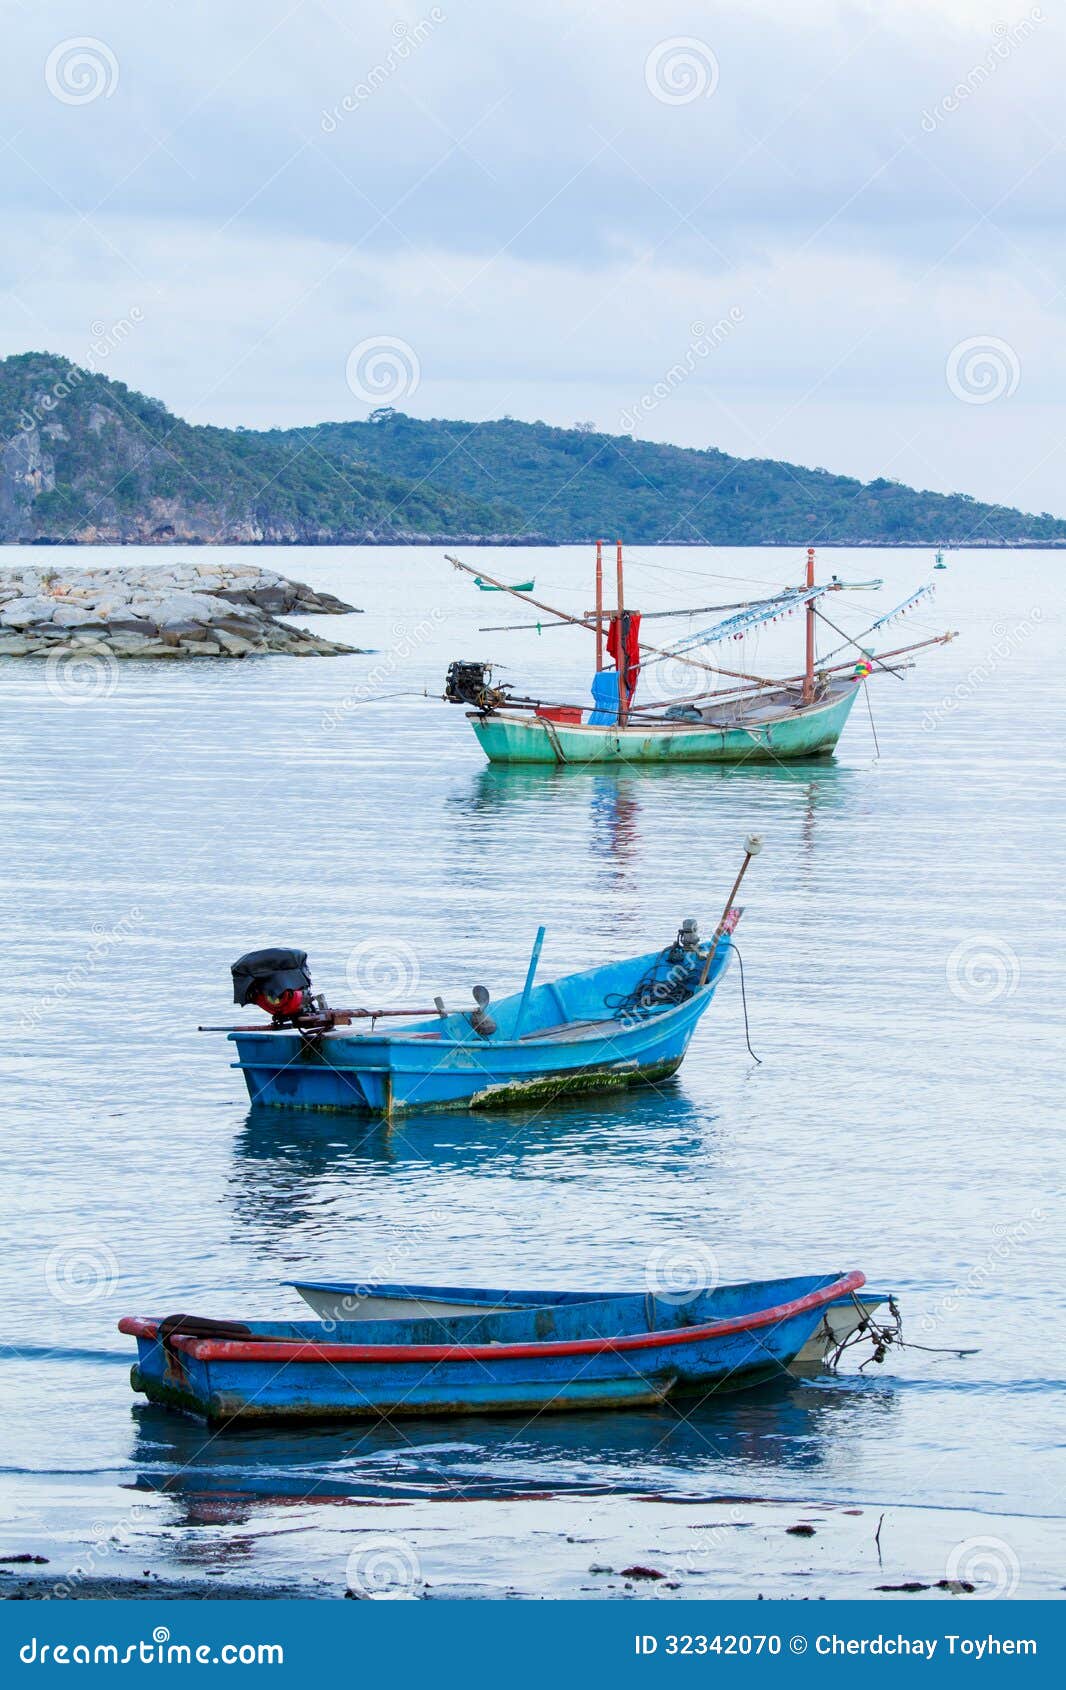 Small Fishing Boat Parked On The Beach. Stock Photo - Image: 32342070